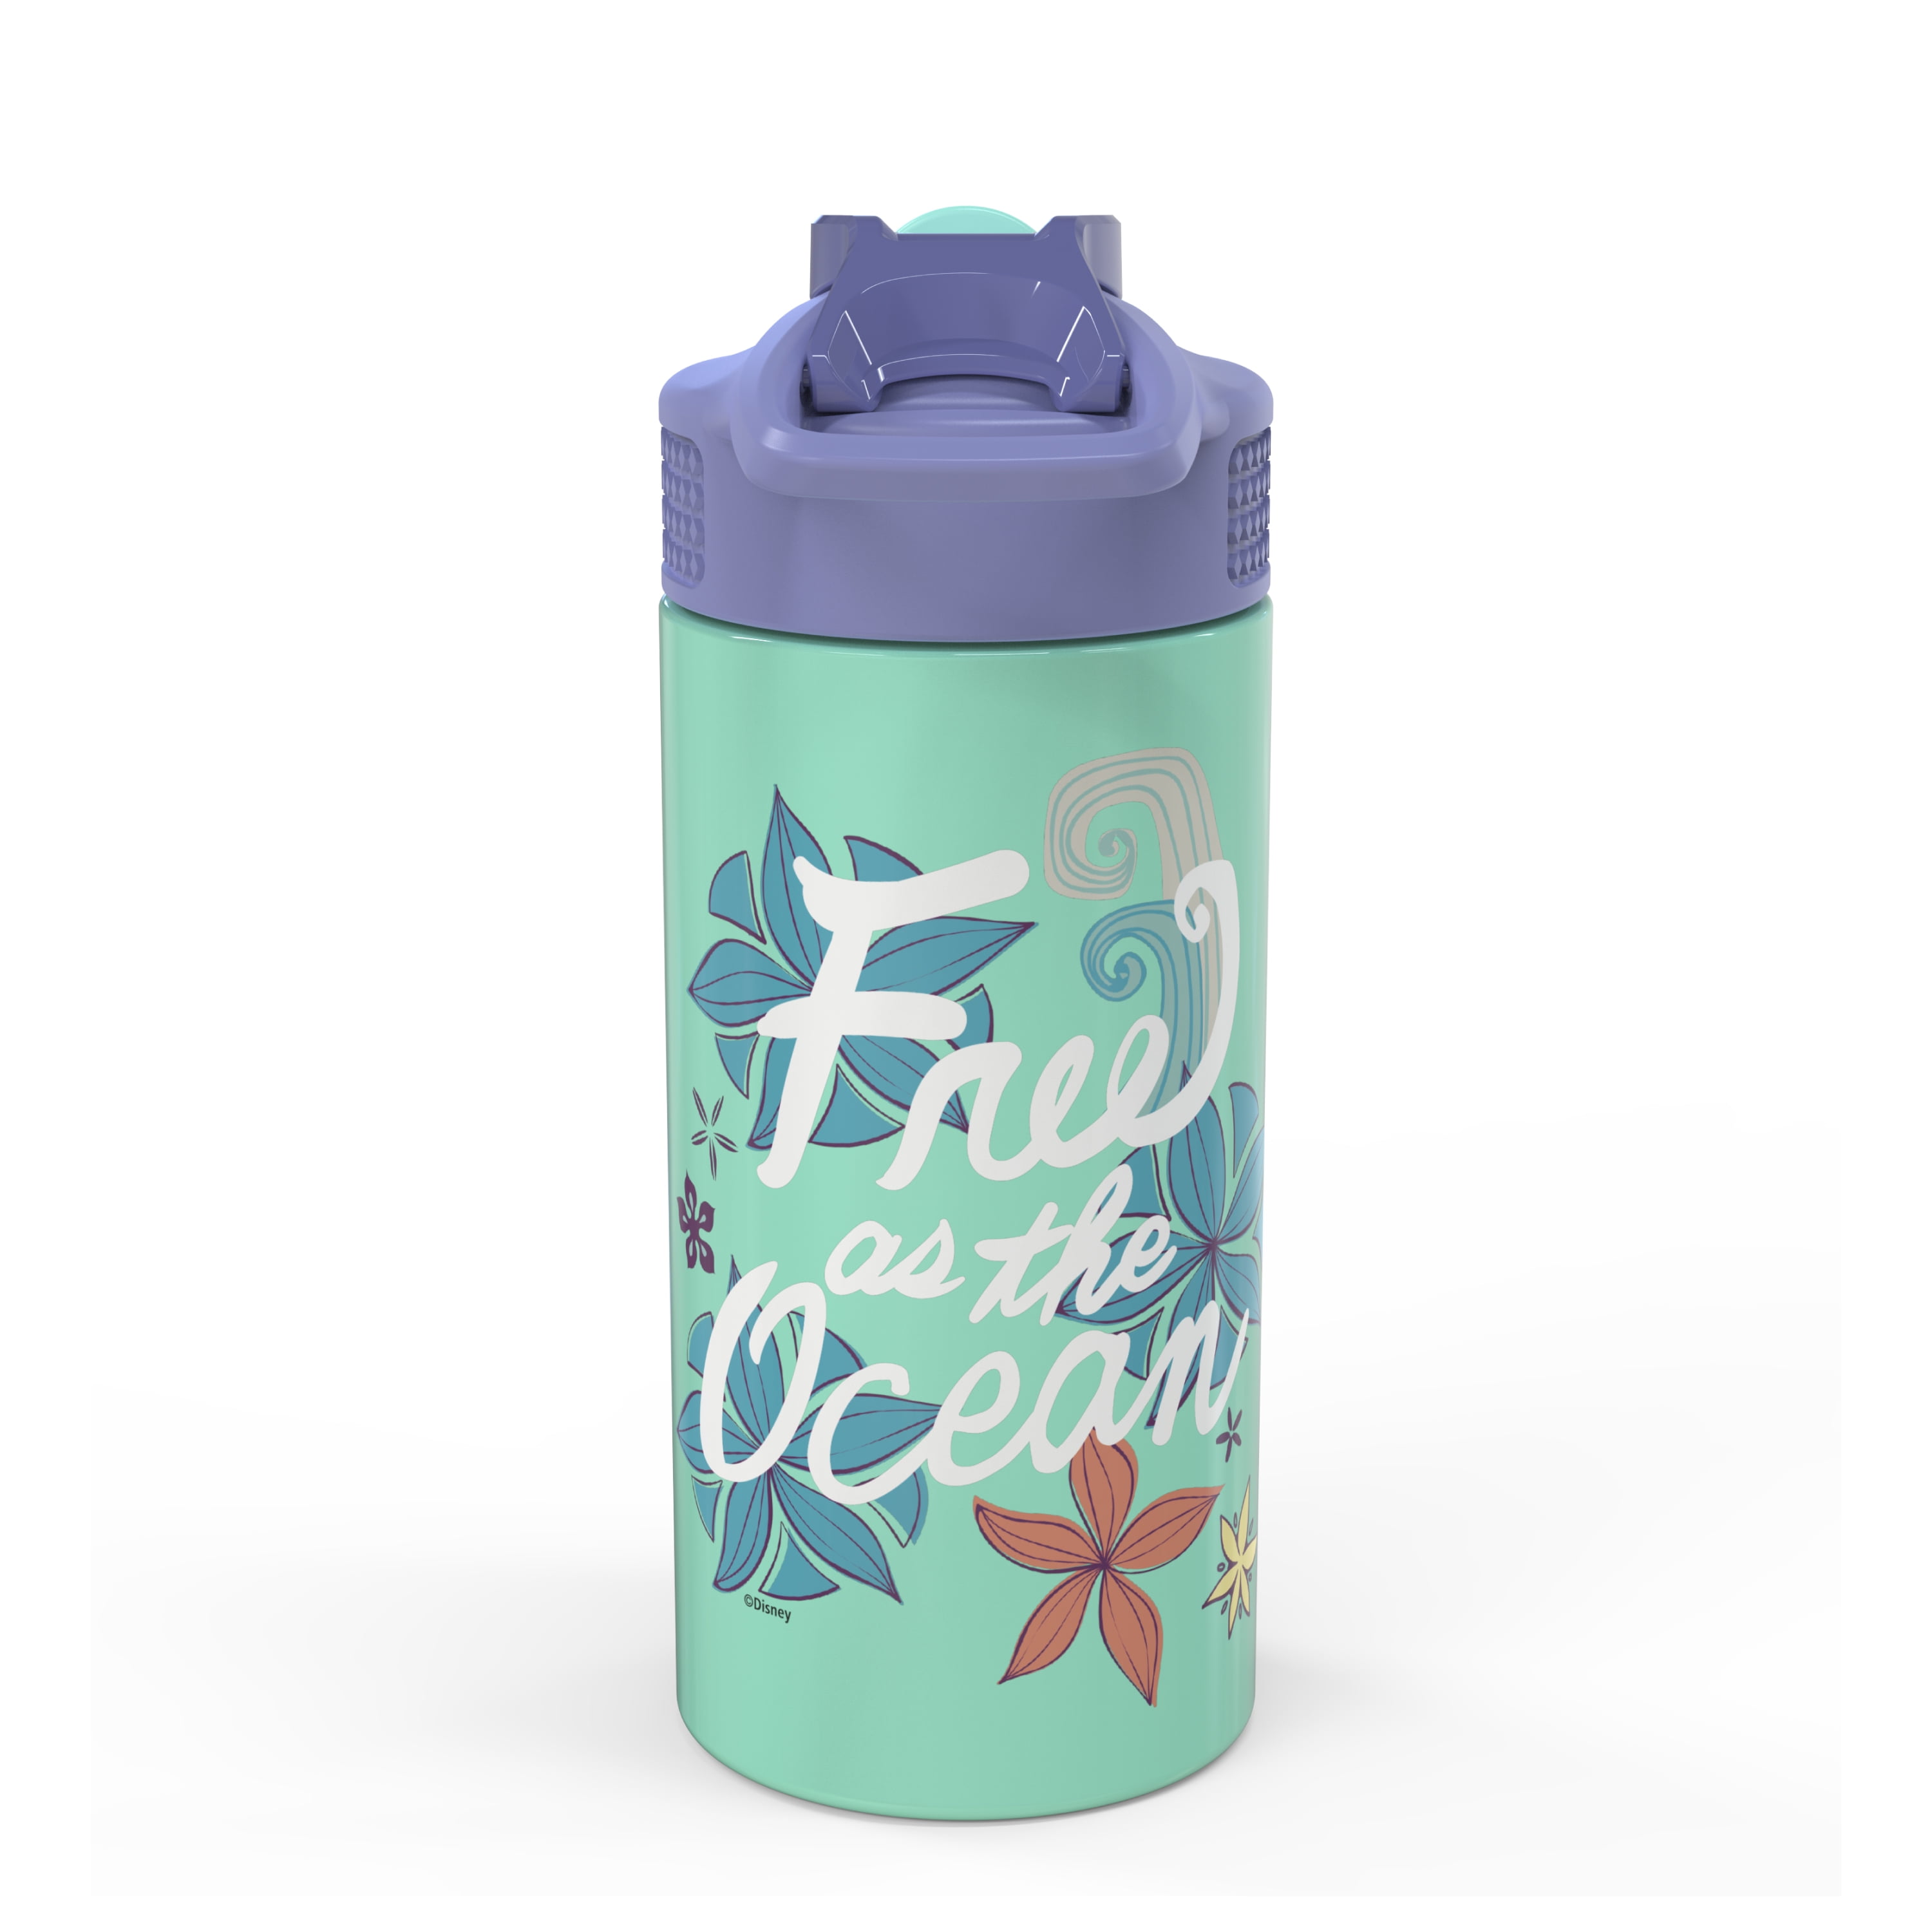 IRON °FLASK Kids Water Bottle Spring Bundle with Silicone Boot, Spring Kids  Gift, Insulated, Cute, Durable, Fun - Sharks 14oz